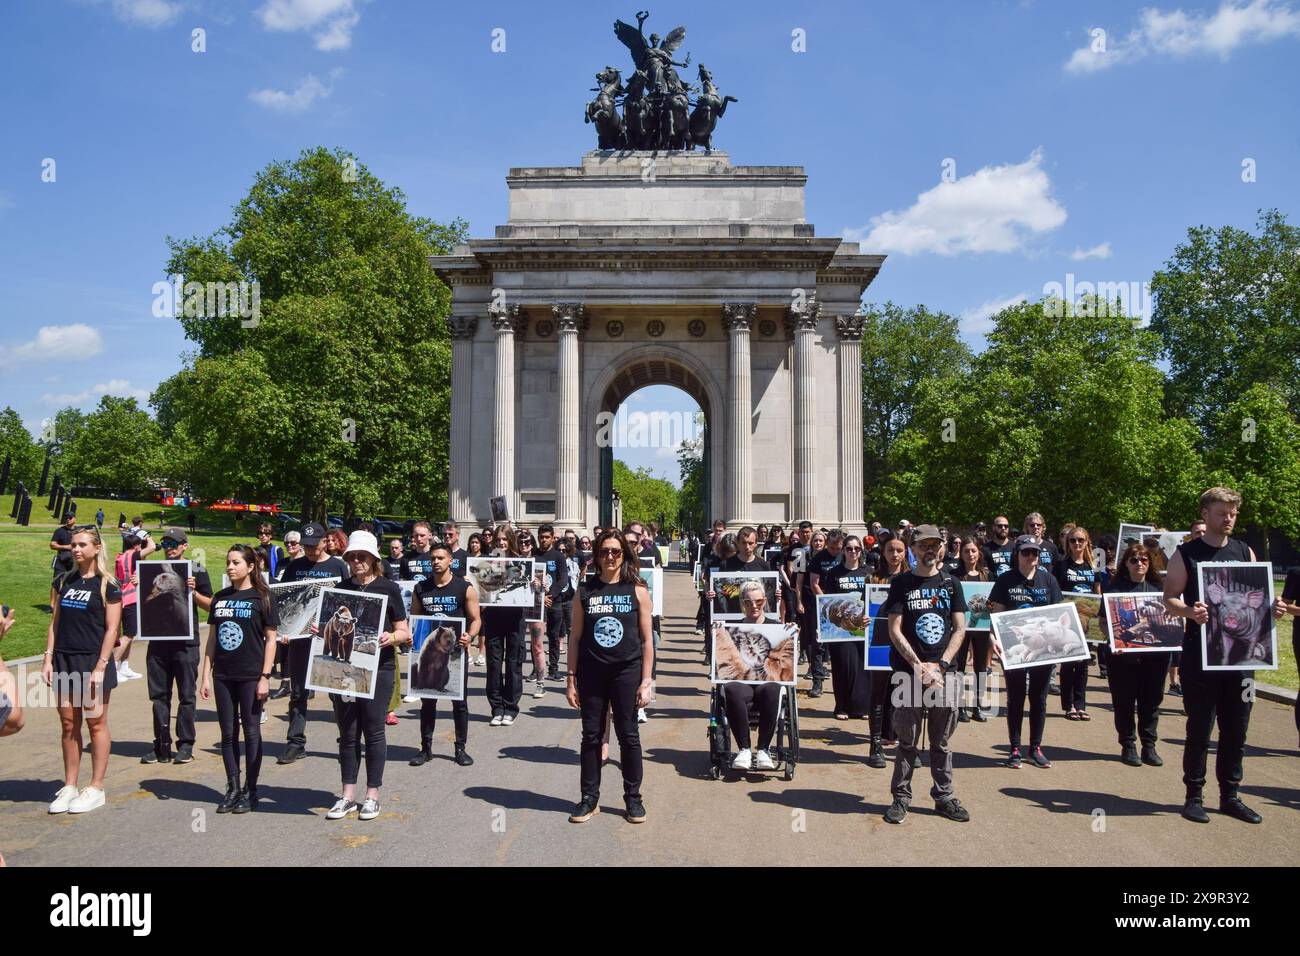 London, UK. 2nd June 2024. Animal rights activists gather with pictures of animals next to the Wellington Arch at Hyde Park Corner for the National Animal Rights Day memorial. The annual event, taking place in numerous countries around the world, honours the billions of animals killed, abused and exploited by humans, and celebrates progress towards freedom for all species. Credit: Vuk Valcic/Alamy Live News Stock Photo